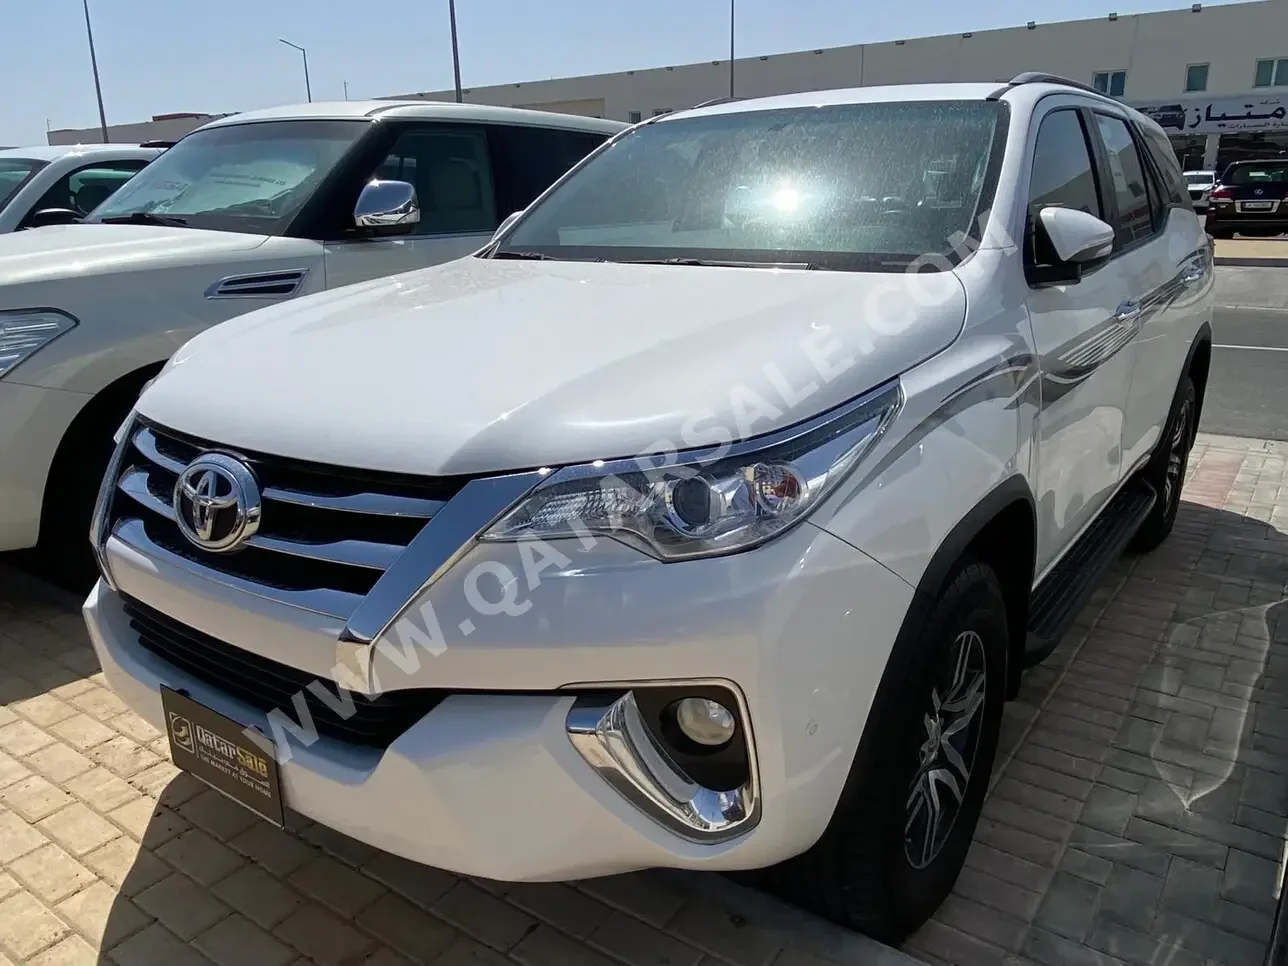 Toyota  Fortuner  2020  Automatic  33,000 Km  4 Cylinder  Four Wheel Drive (4WD)  SUV  White